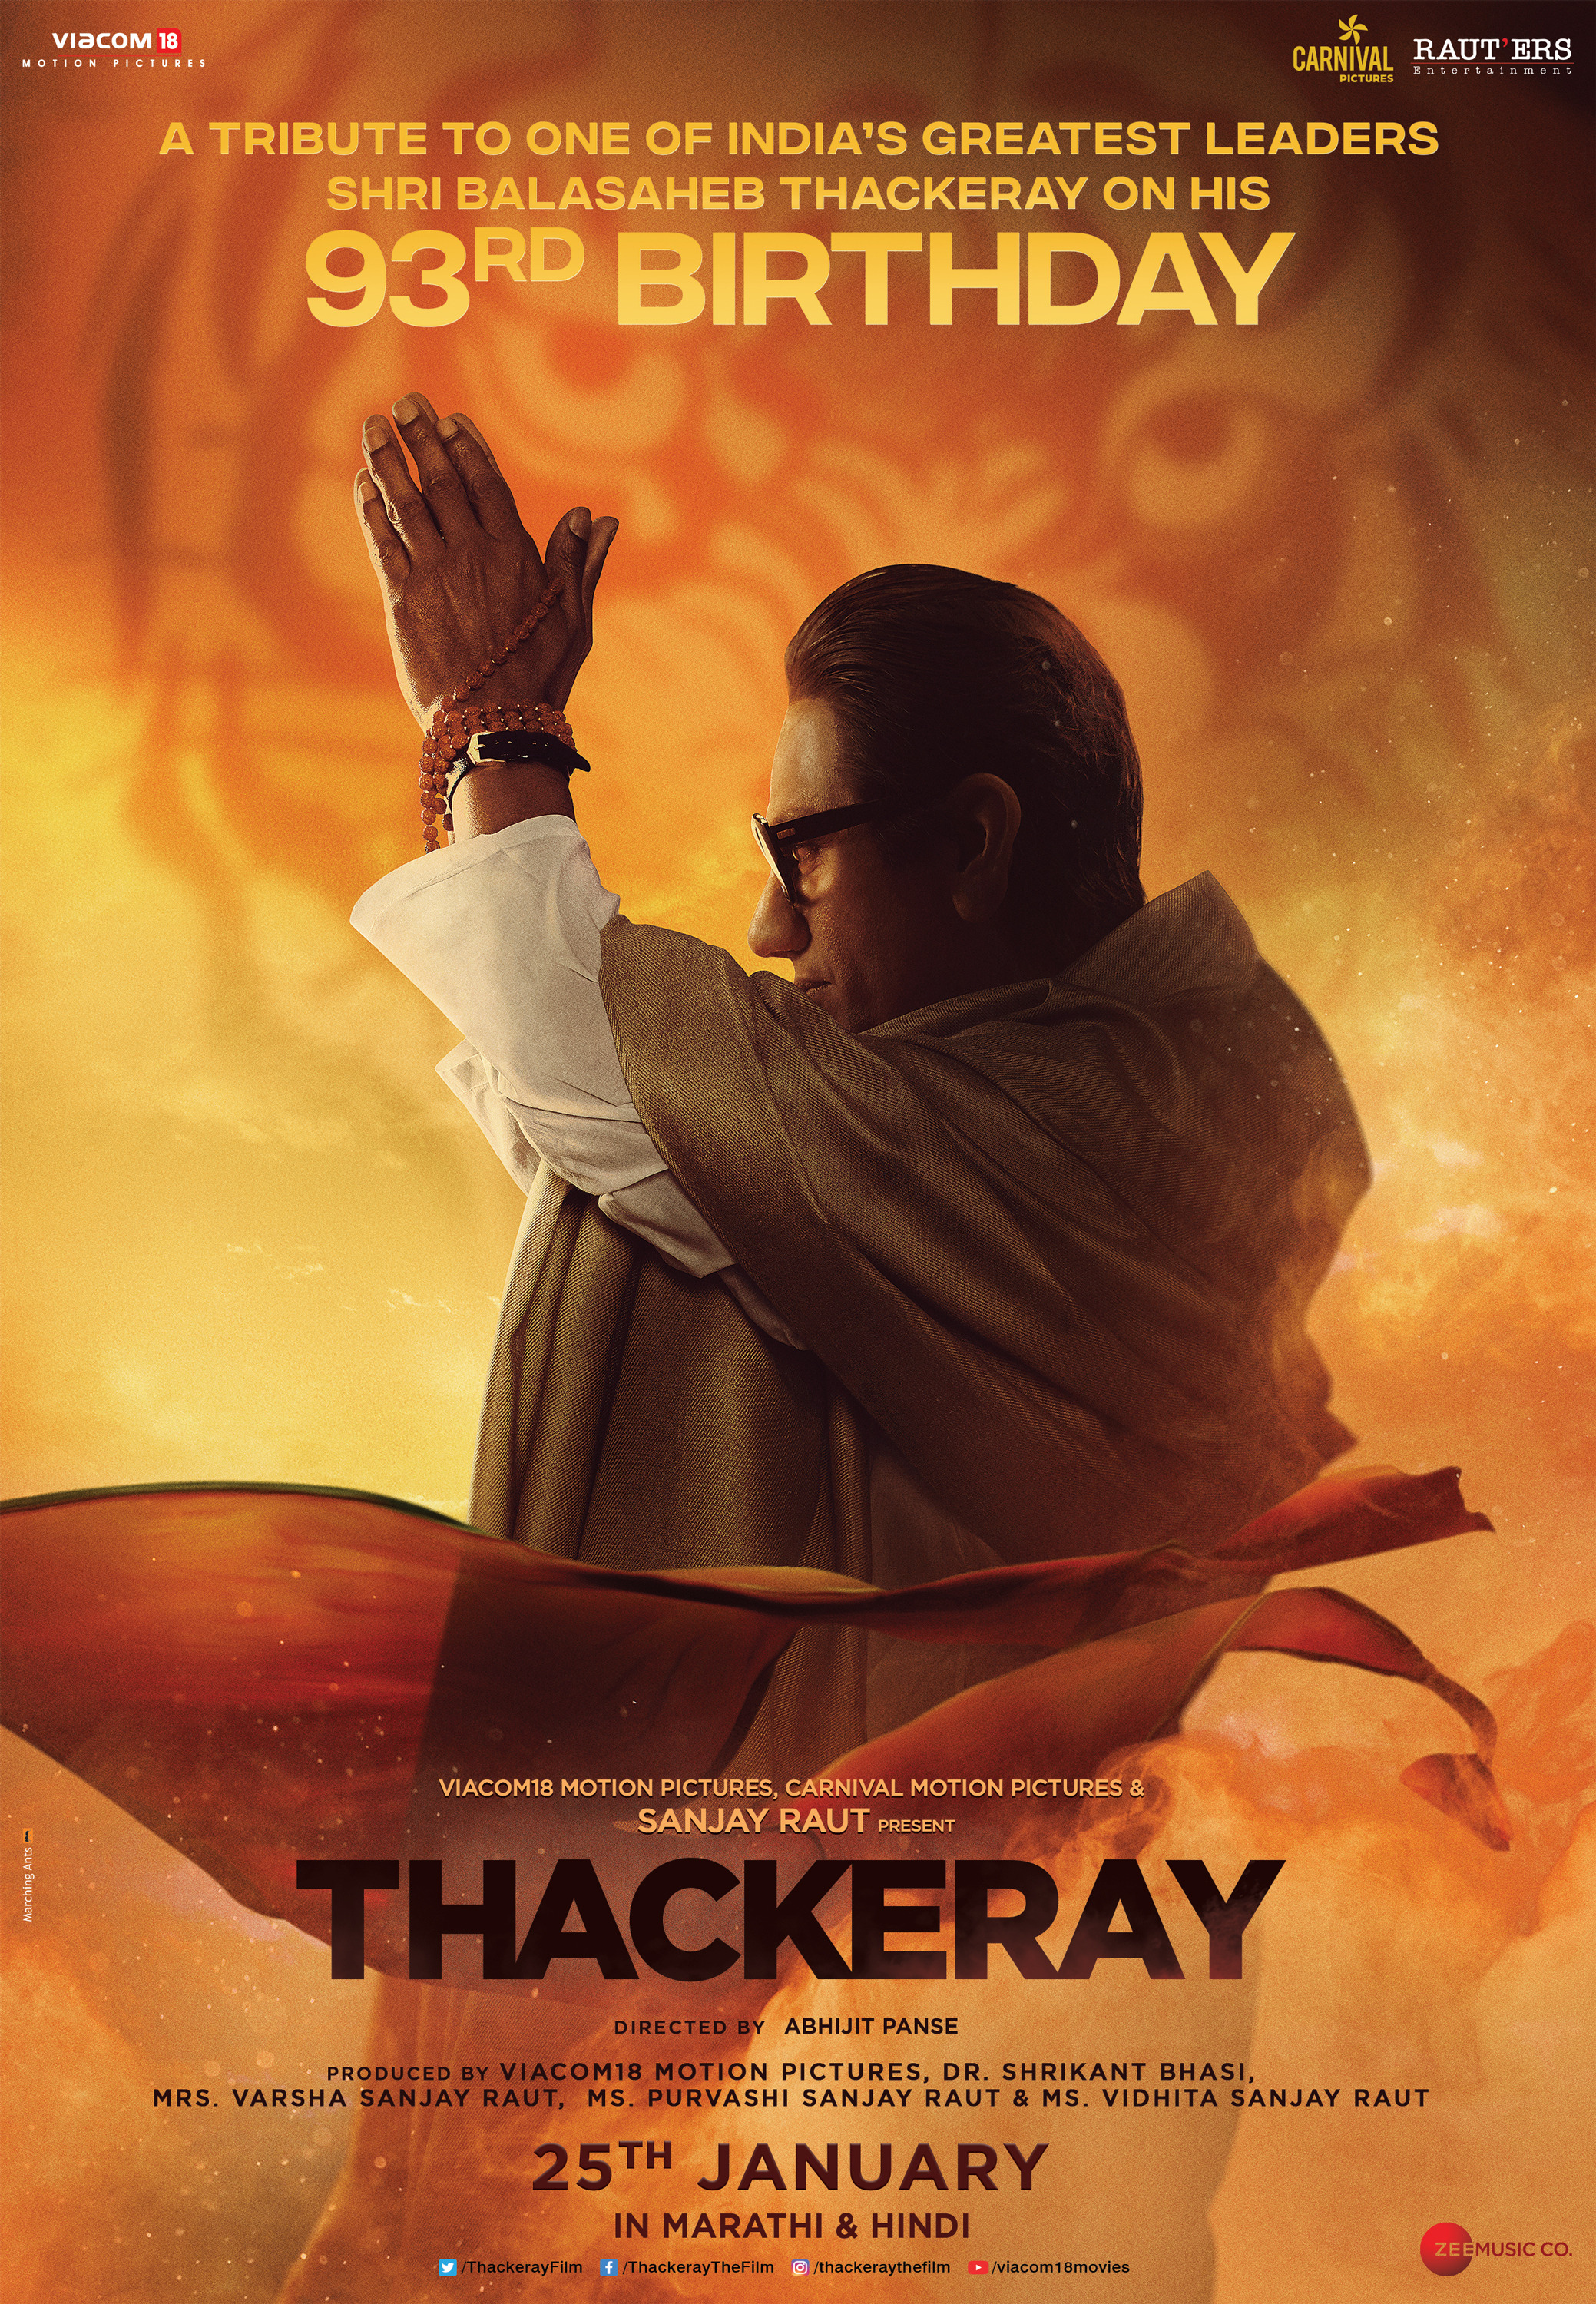 Mega Sized Movie Poster Image for Thackeray (#6 of 10)